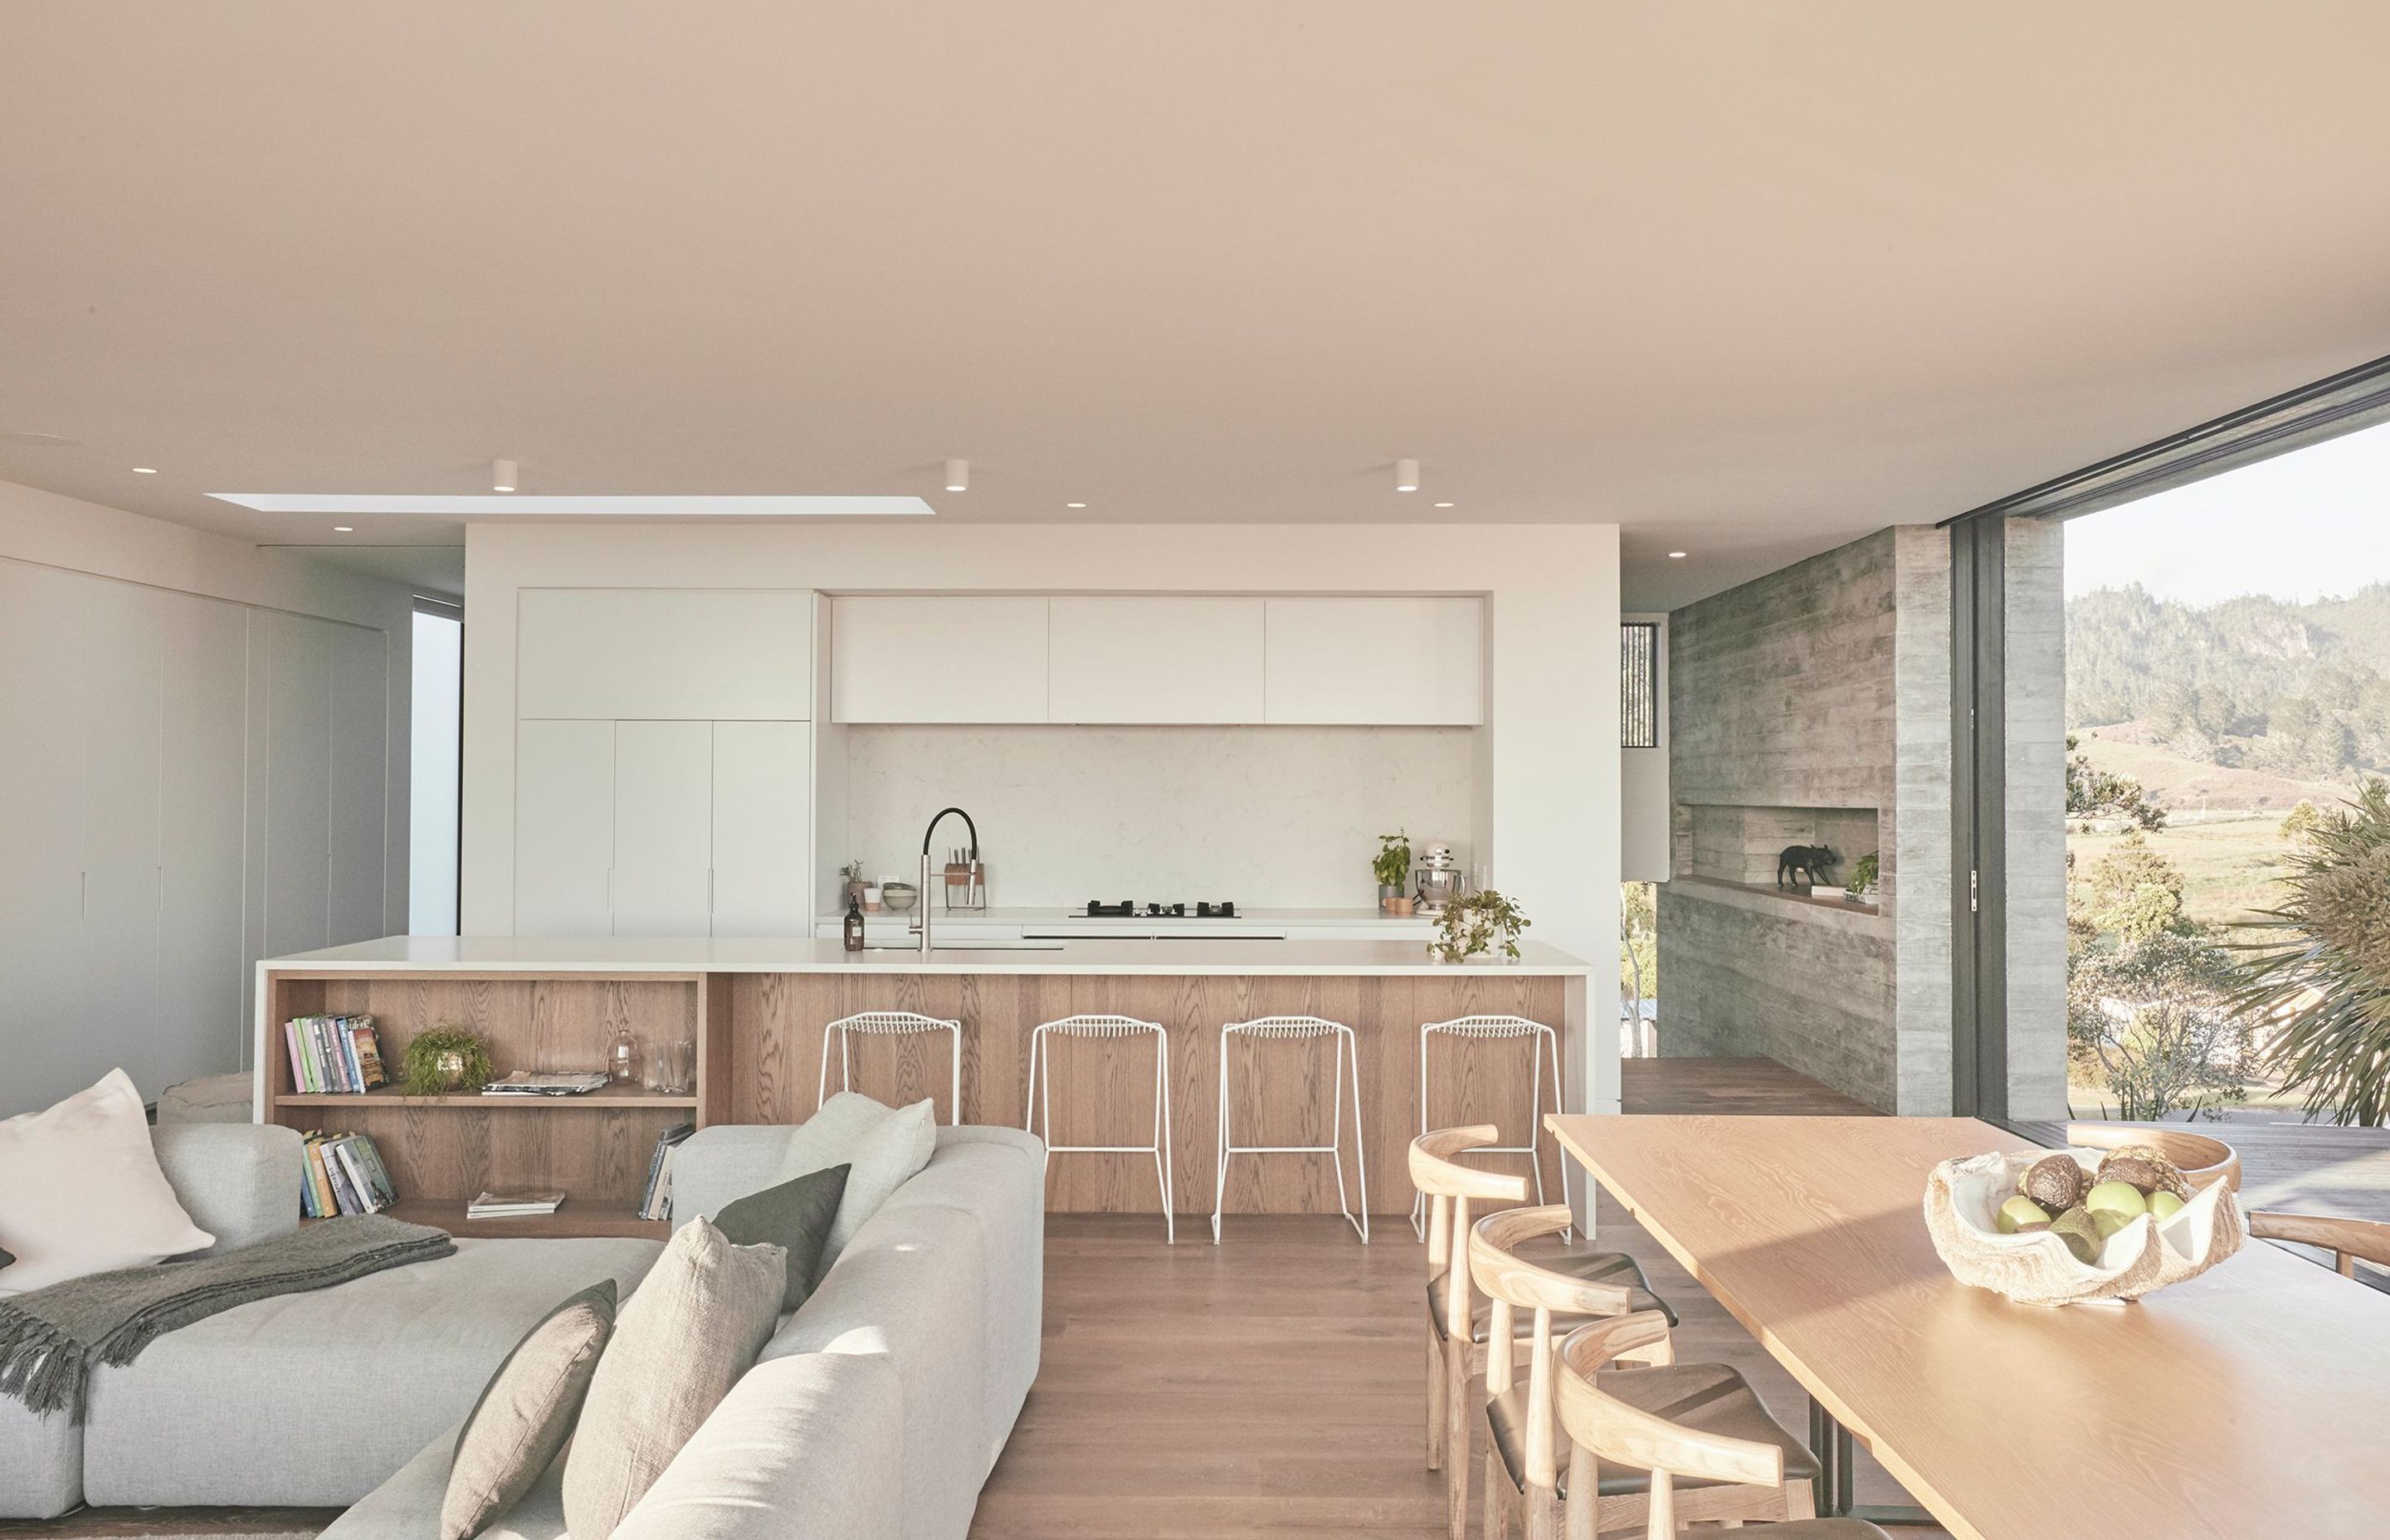 A five-metre long kitchen island is aligned parallel with the beach to allow for connection with the coastal landscape from the sink and servicing area.